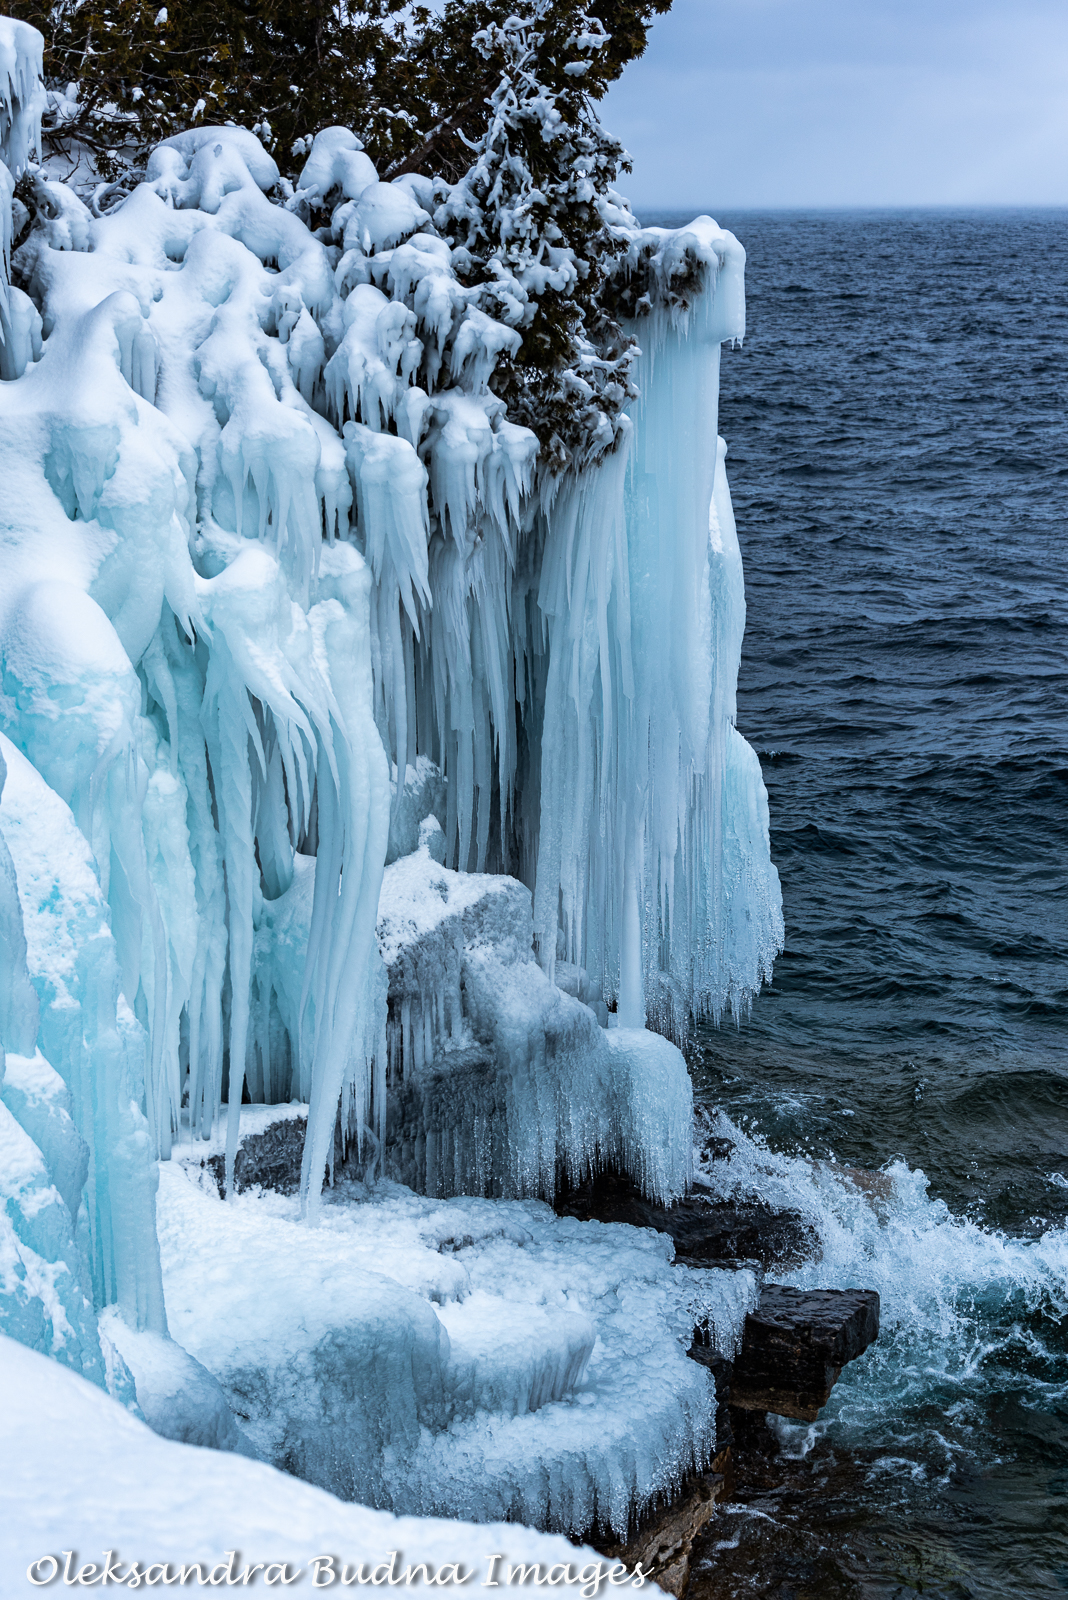 Bruce Peninsula National Park in the winter